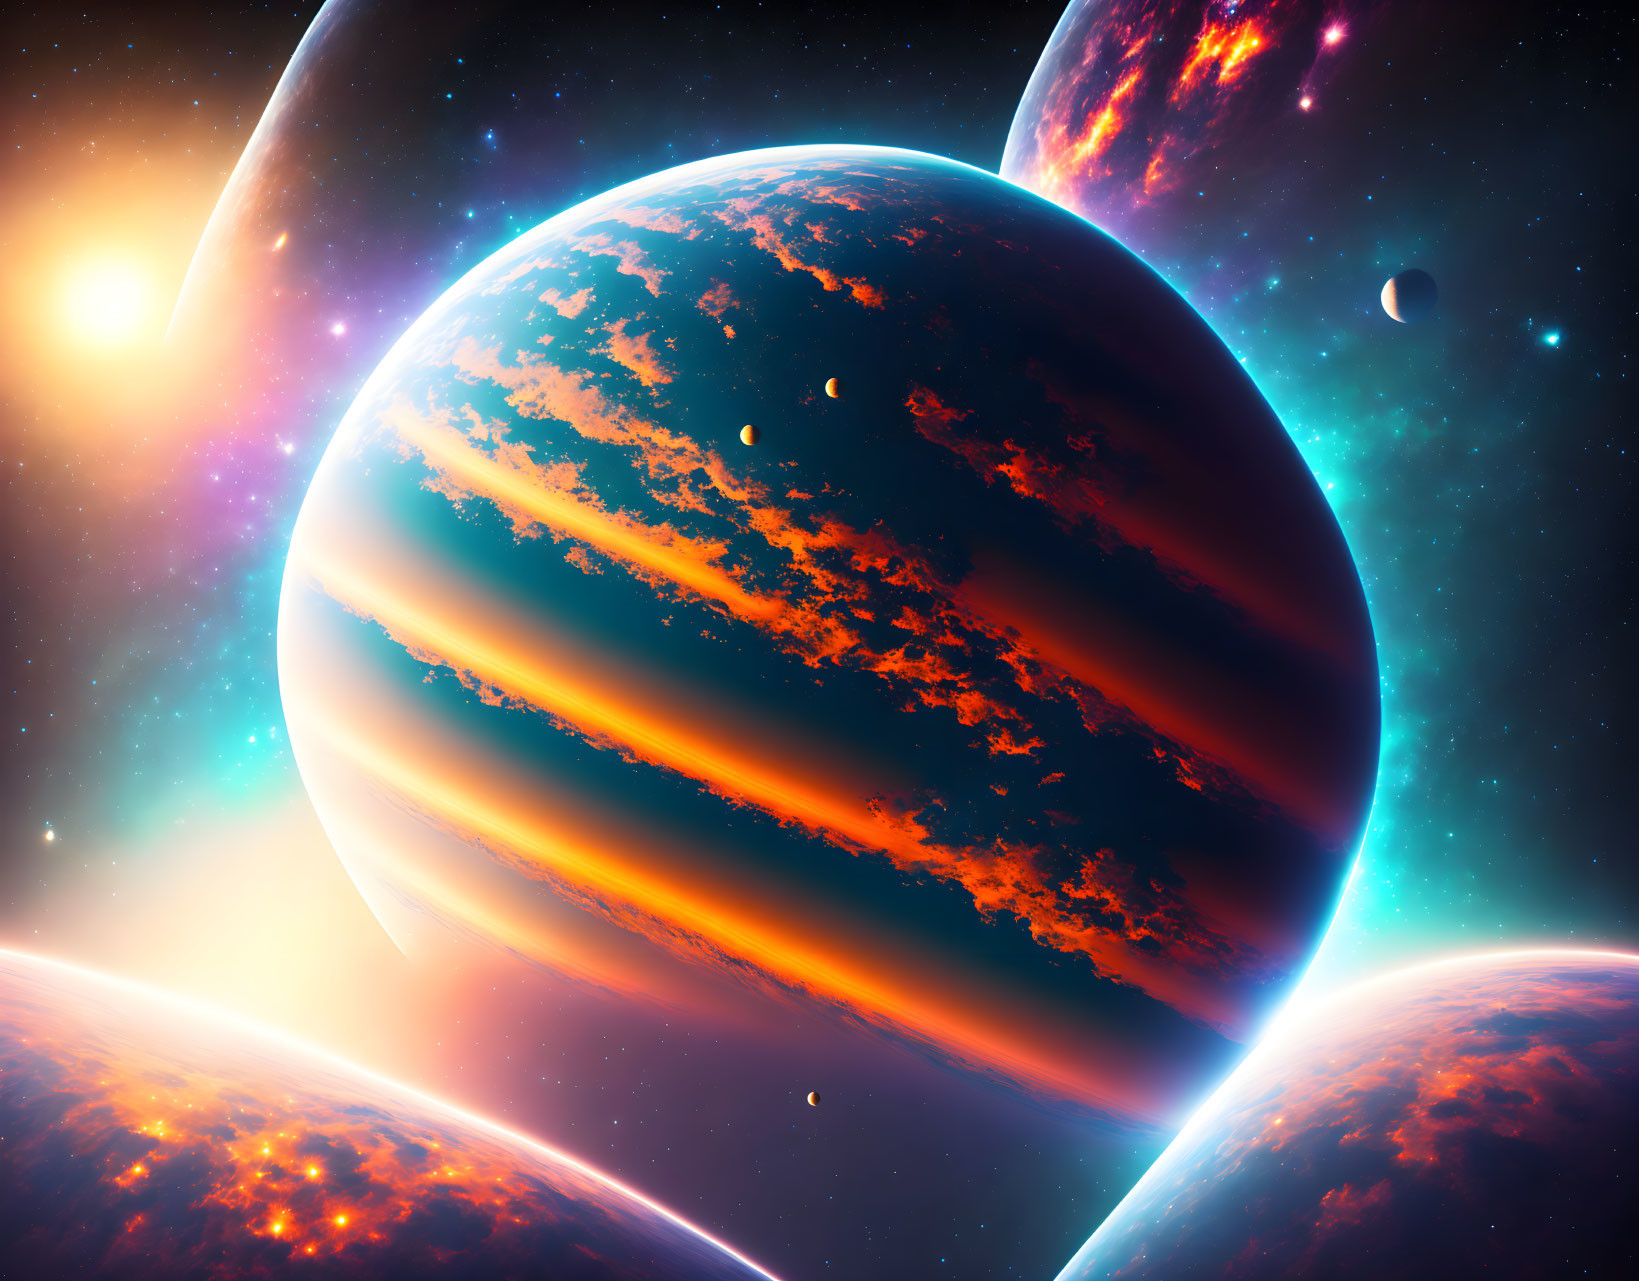 Colorful cosmic scene with orange-striped planet and celestial bodies under warm star glow